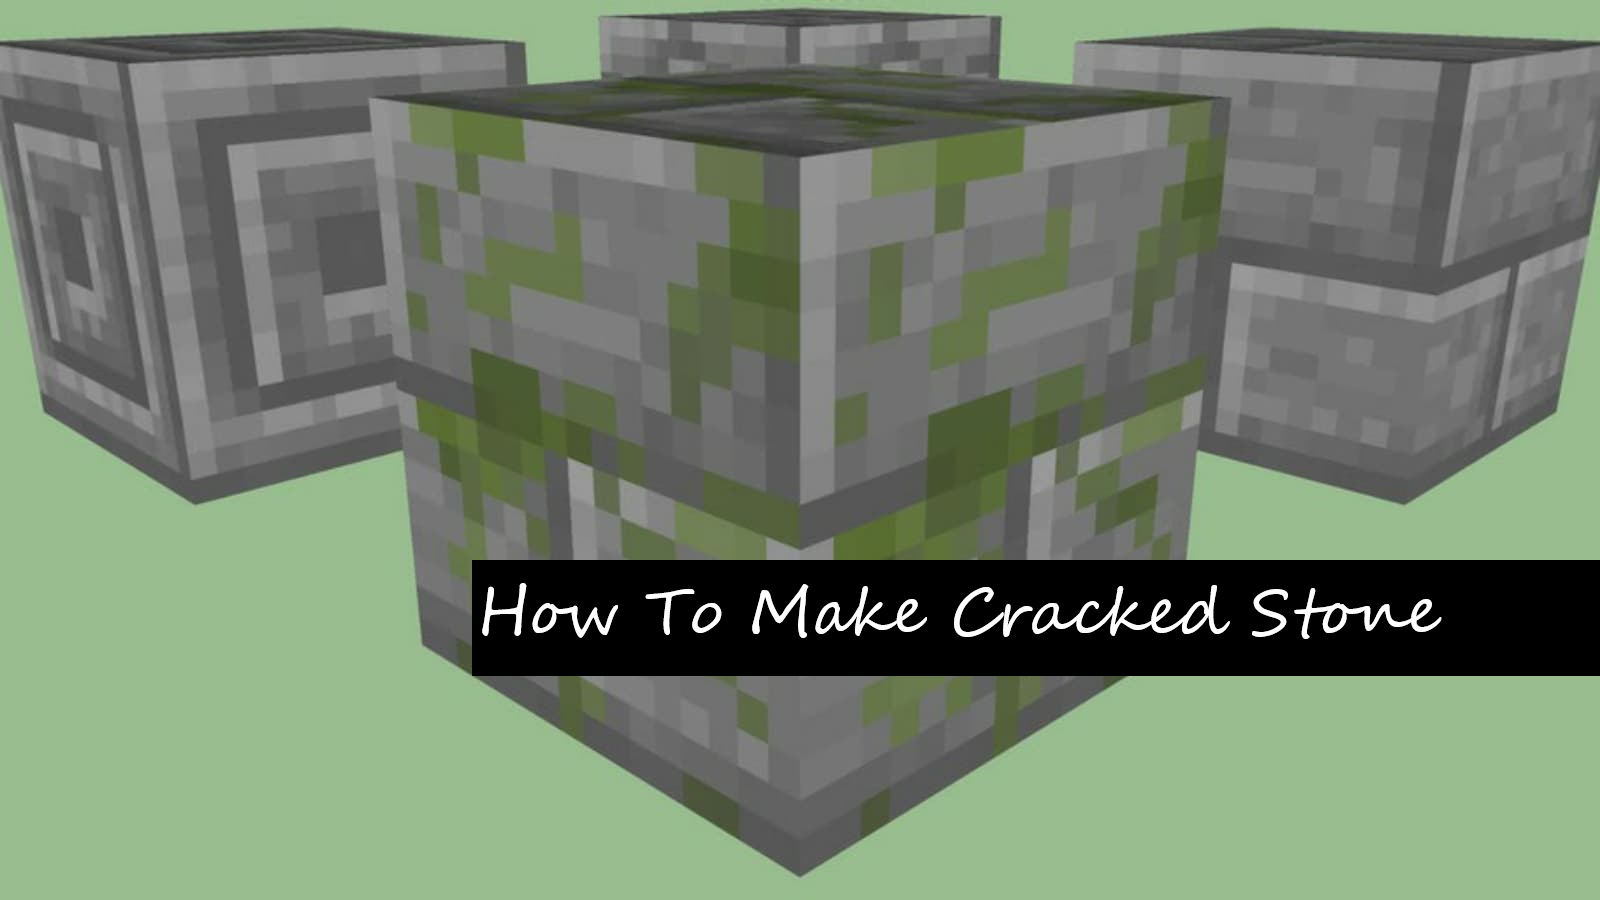 Cracked Stone Bricks In Minecraft: A Detailed Guide About How To Make Cracked Stone Bricks?